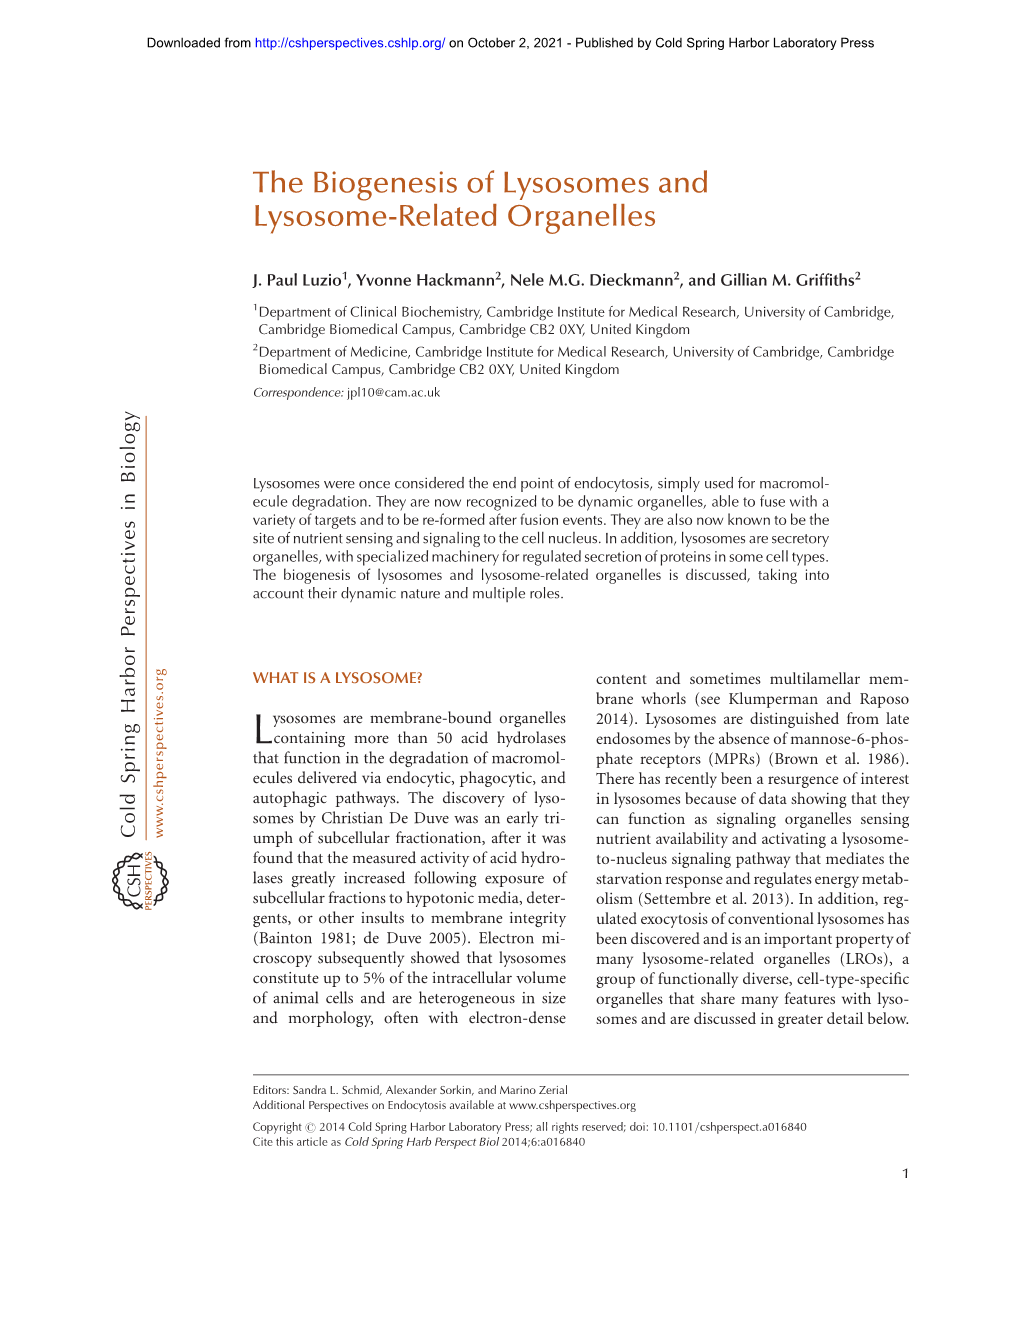 The Biogenesis of Lysosomes and Lysosome-Related Organelles